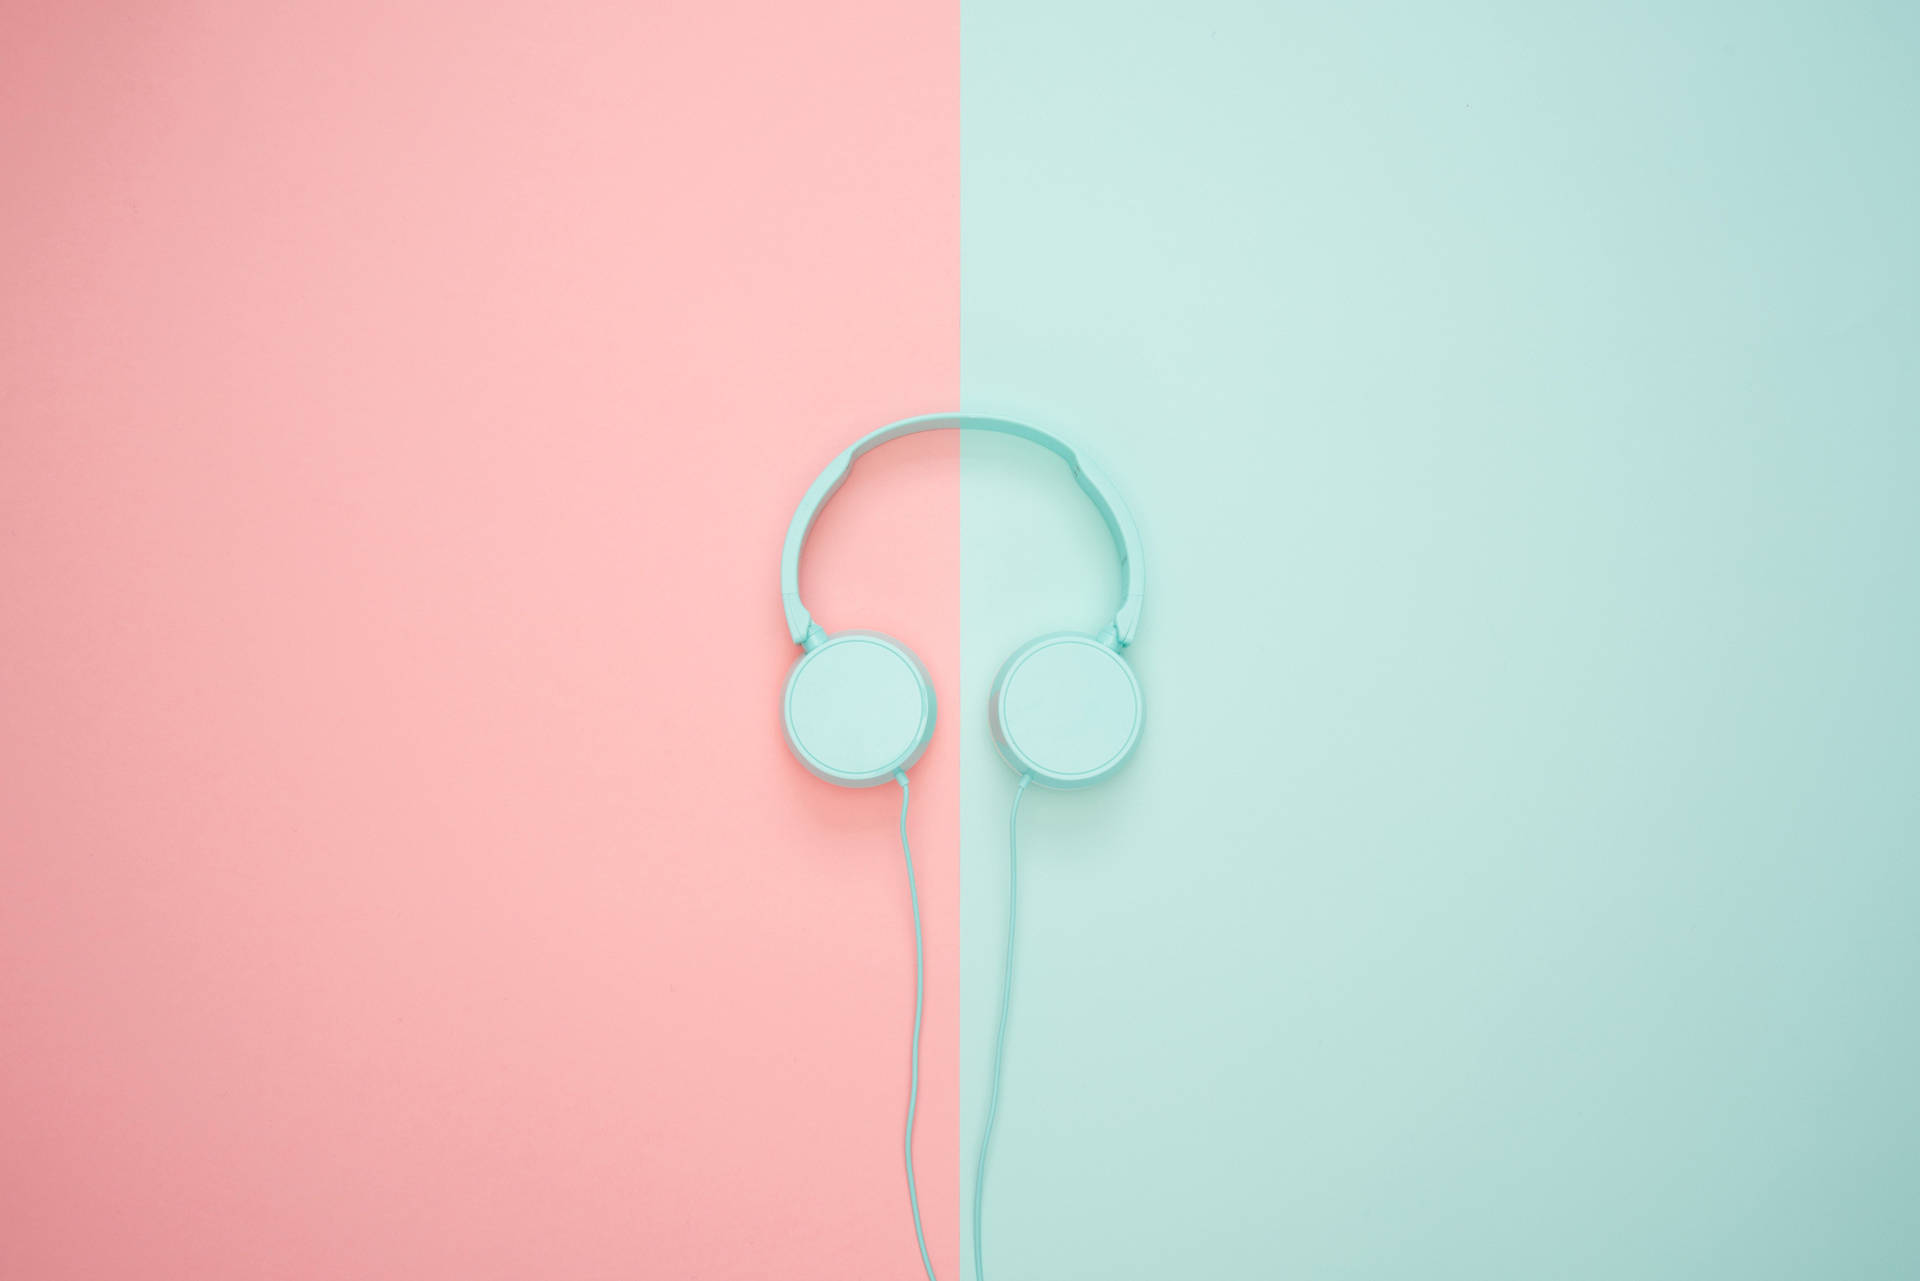 Blue Headset On Pink And Blue